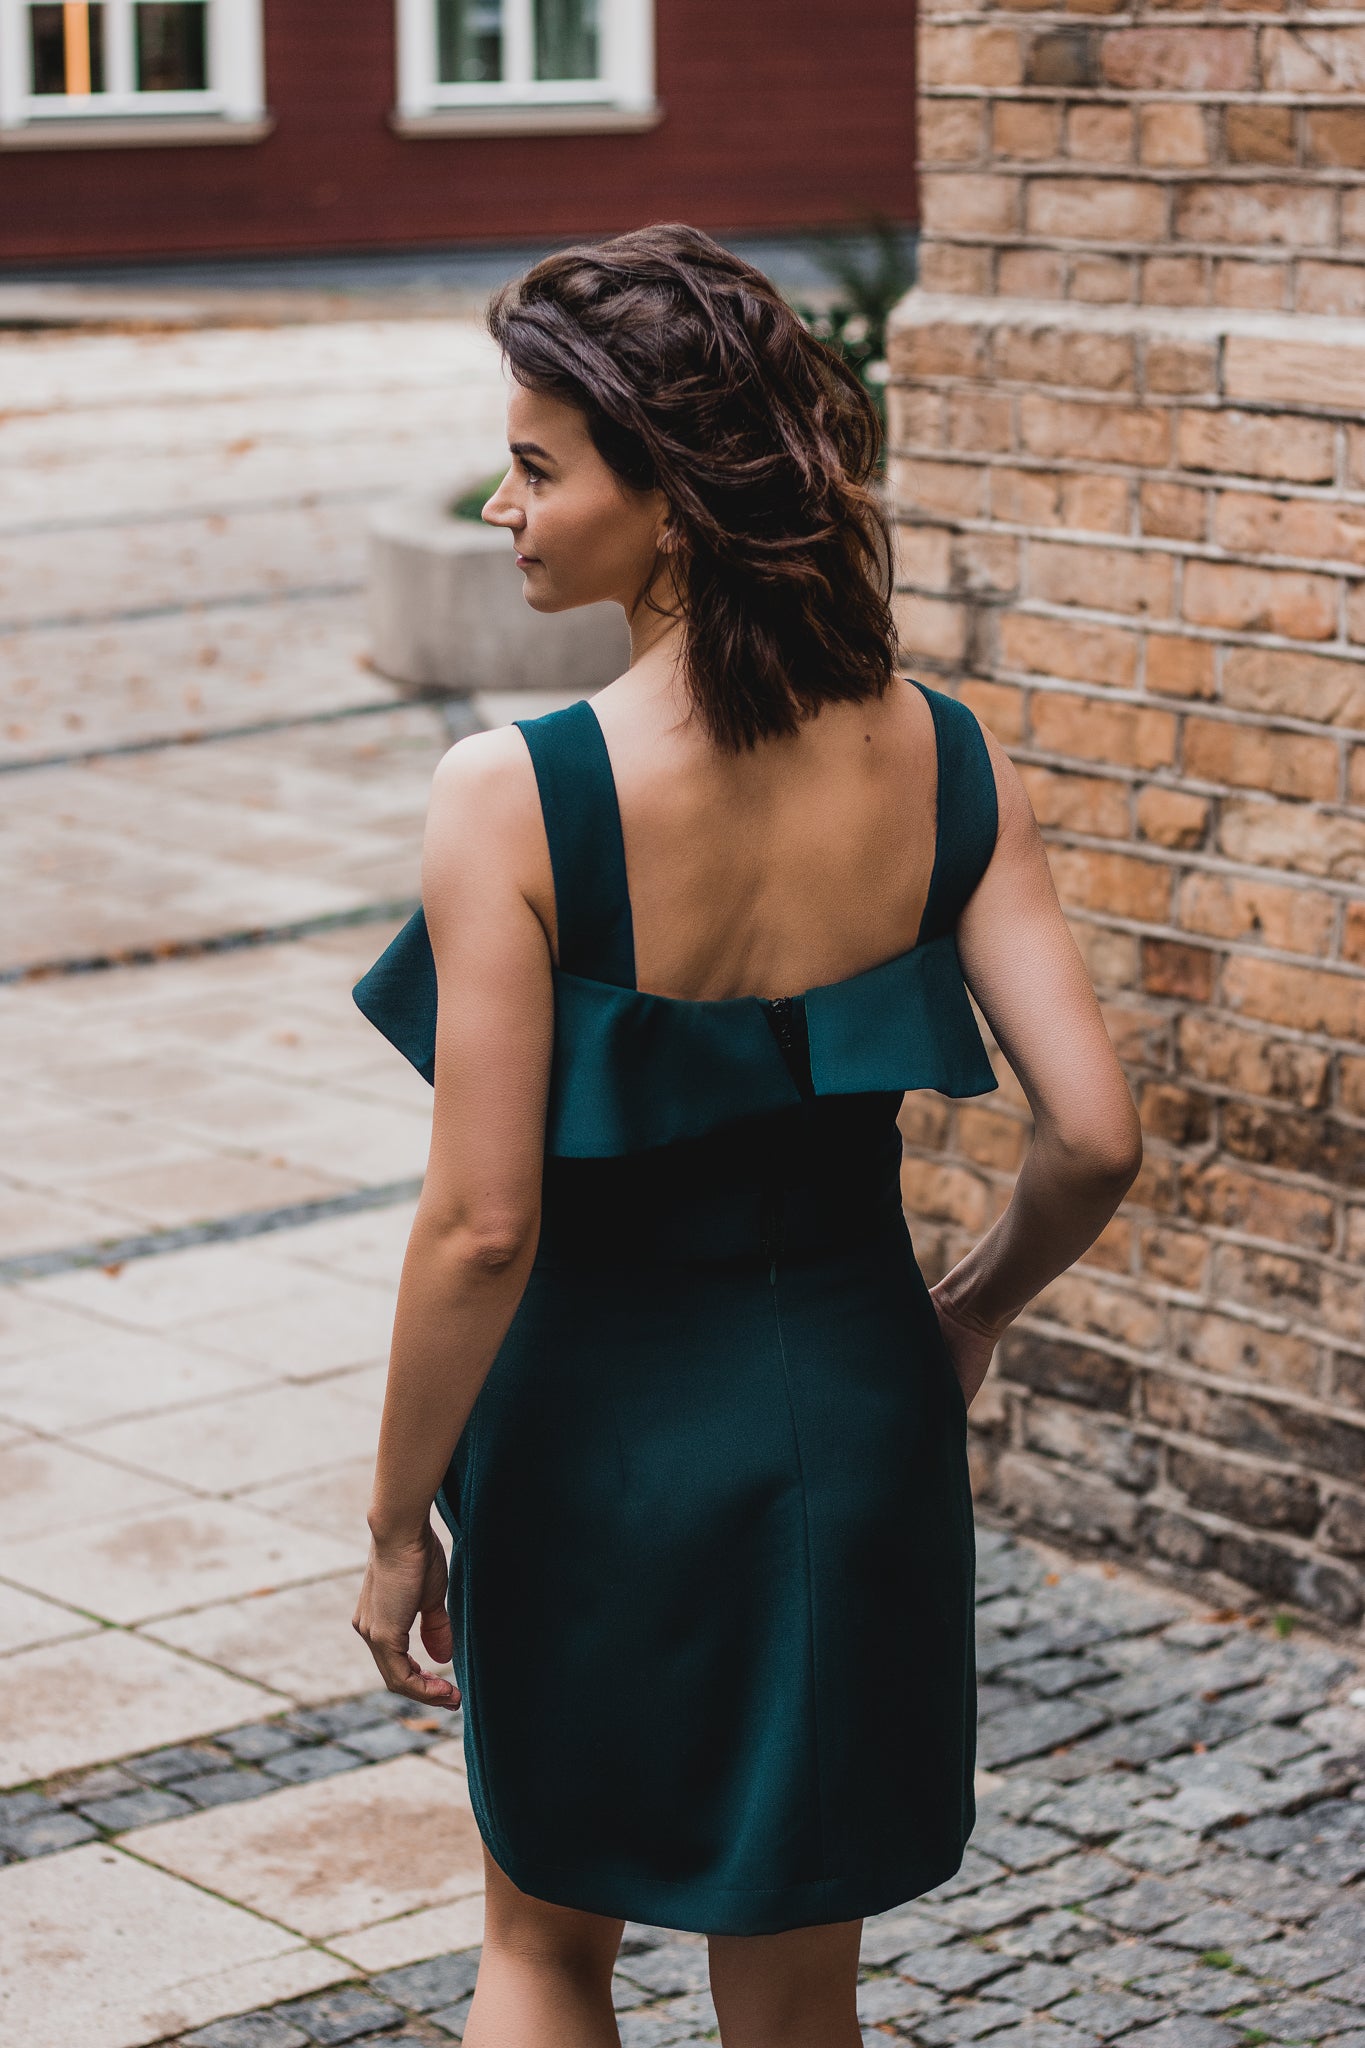 beautiful lady from the back in an emerald green two-piece dress, that consists of a ruffled top and a mini skirt with pockets